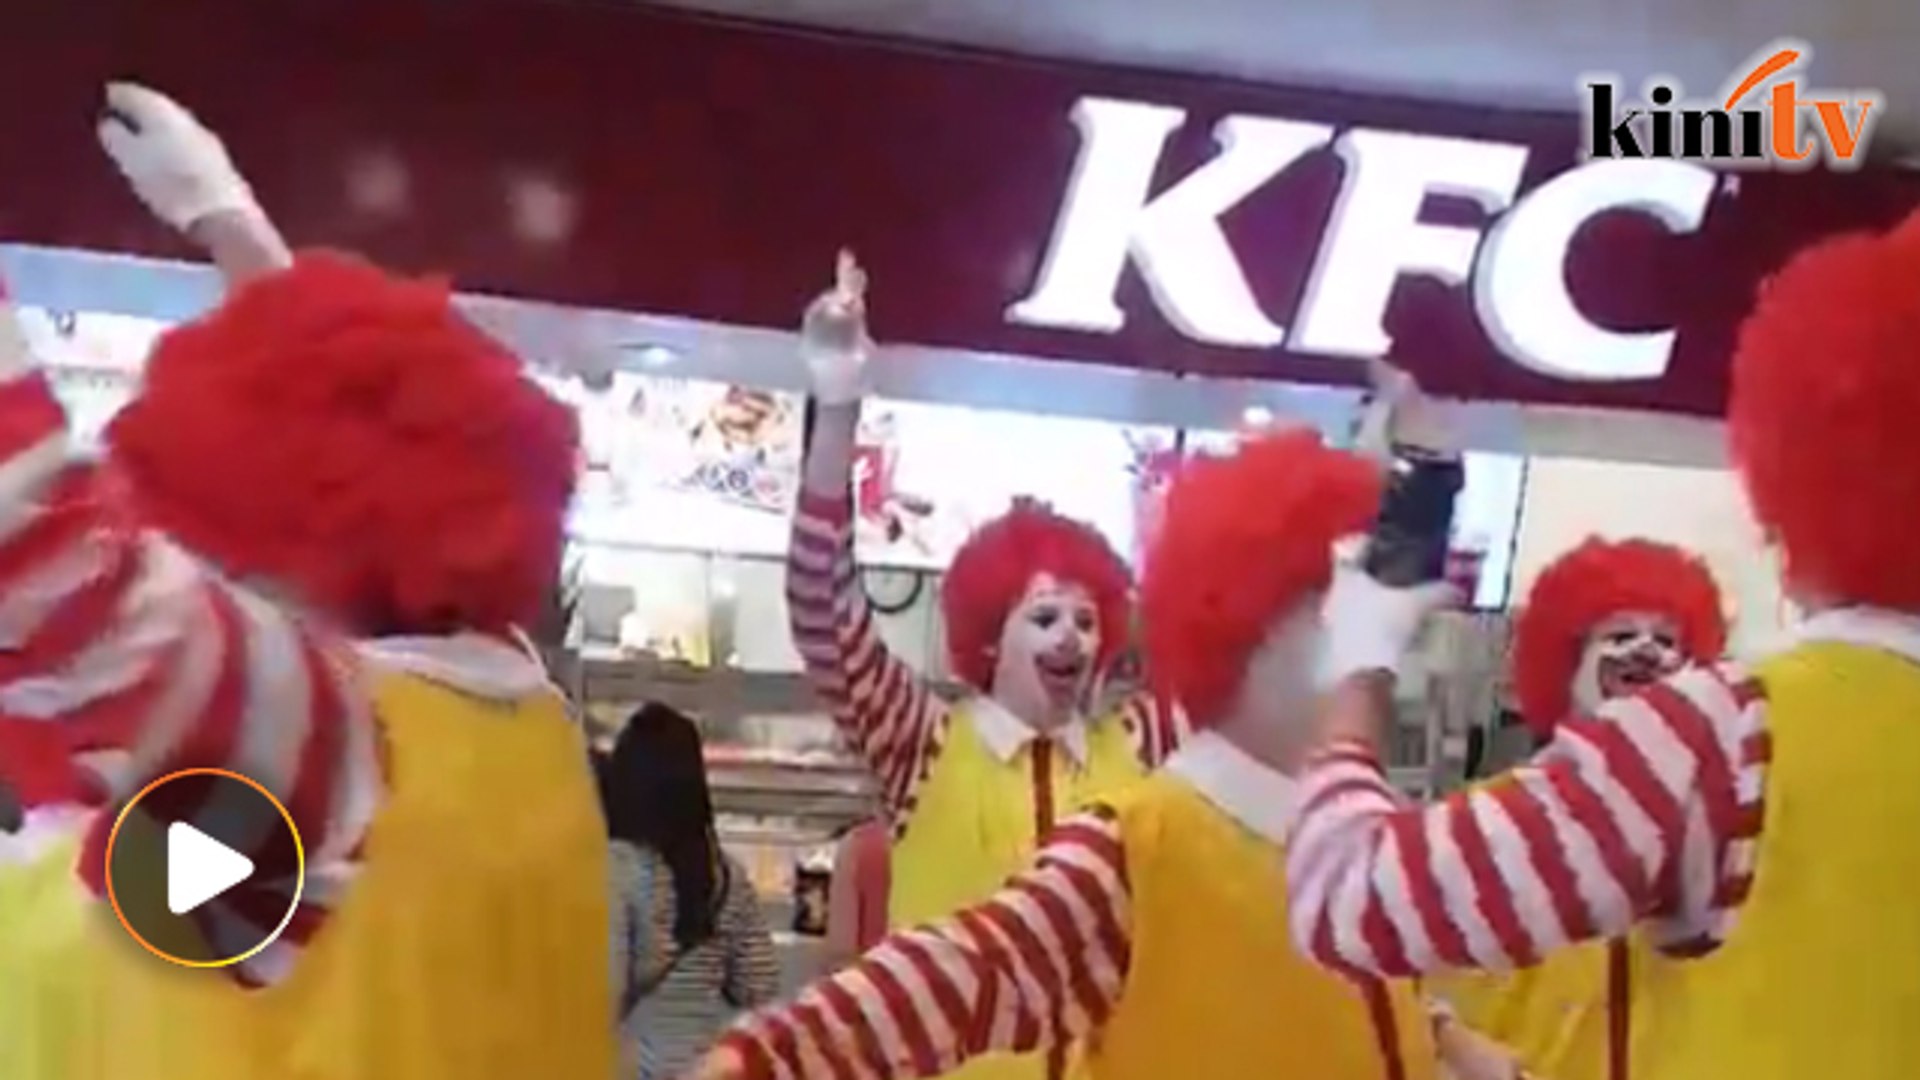 Ronald McDonald clowns invade KFC outlet, chant insults - video Dailymotion